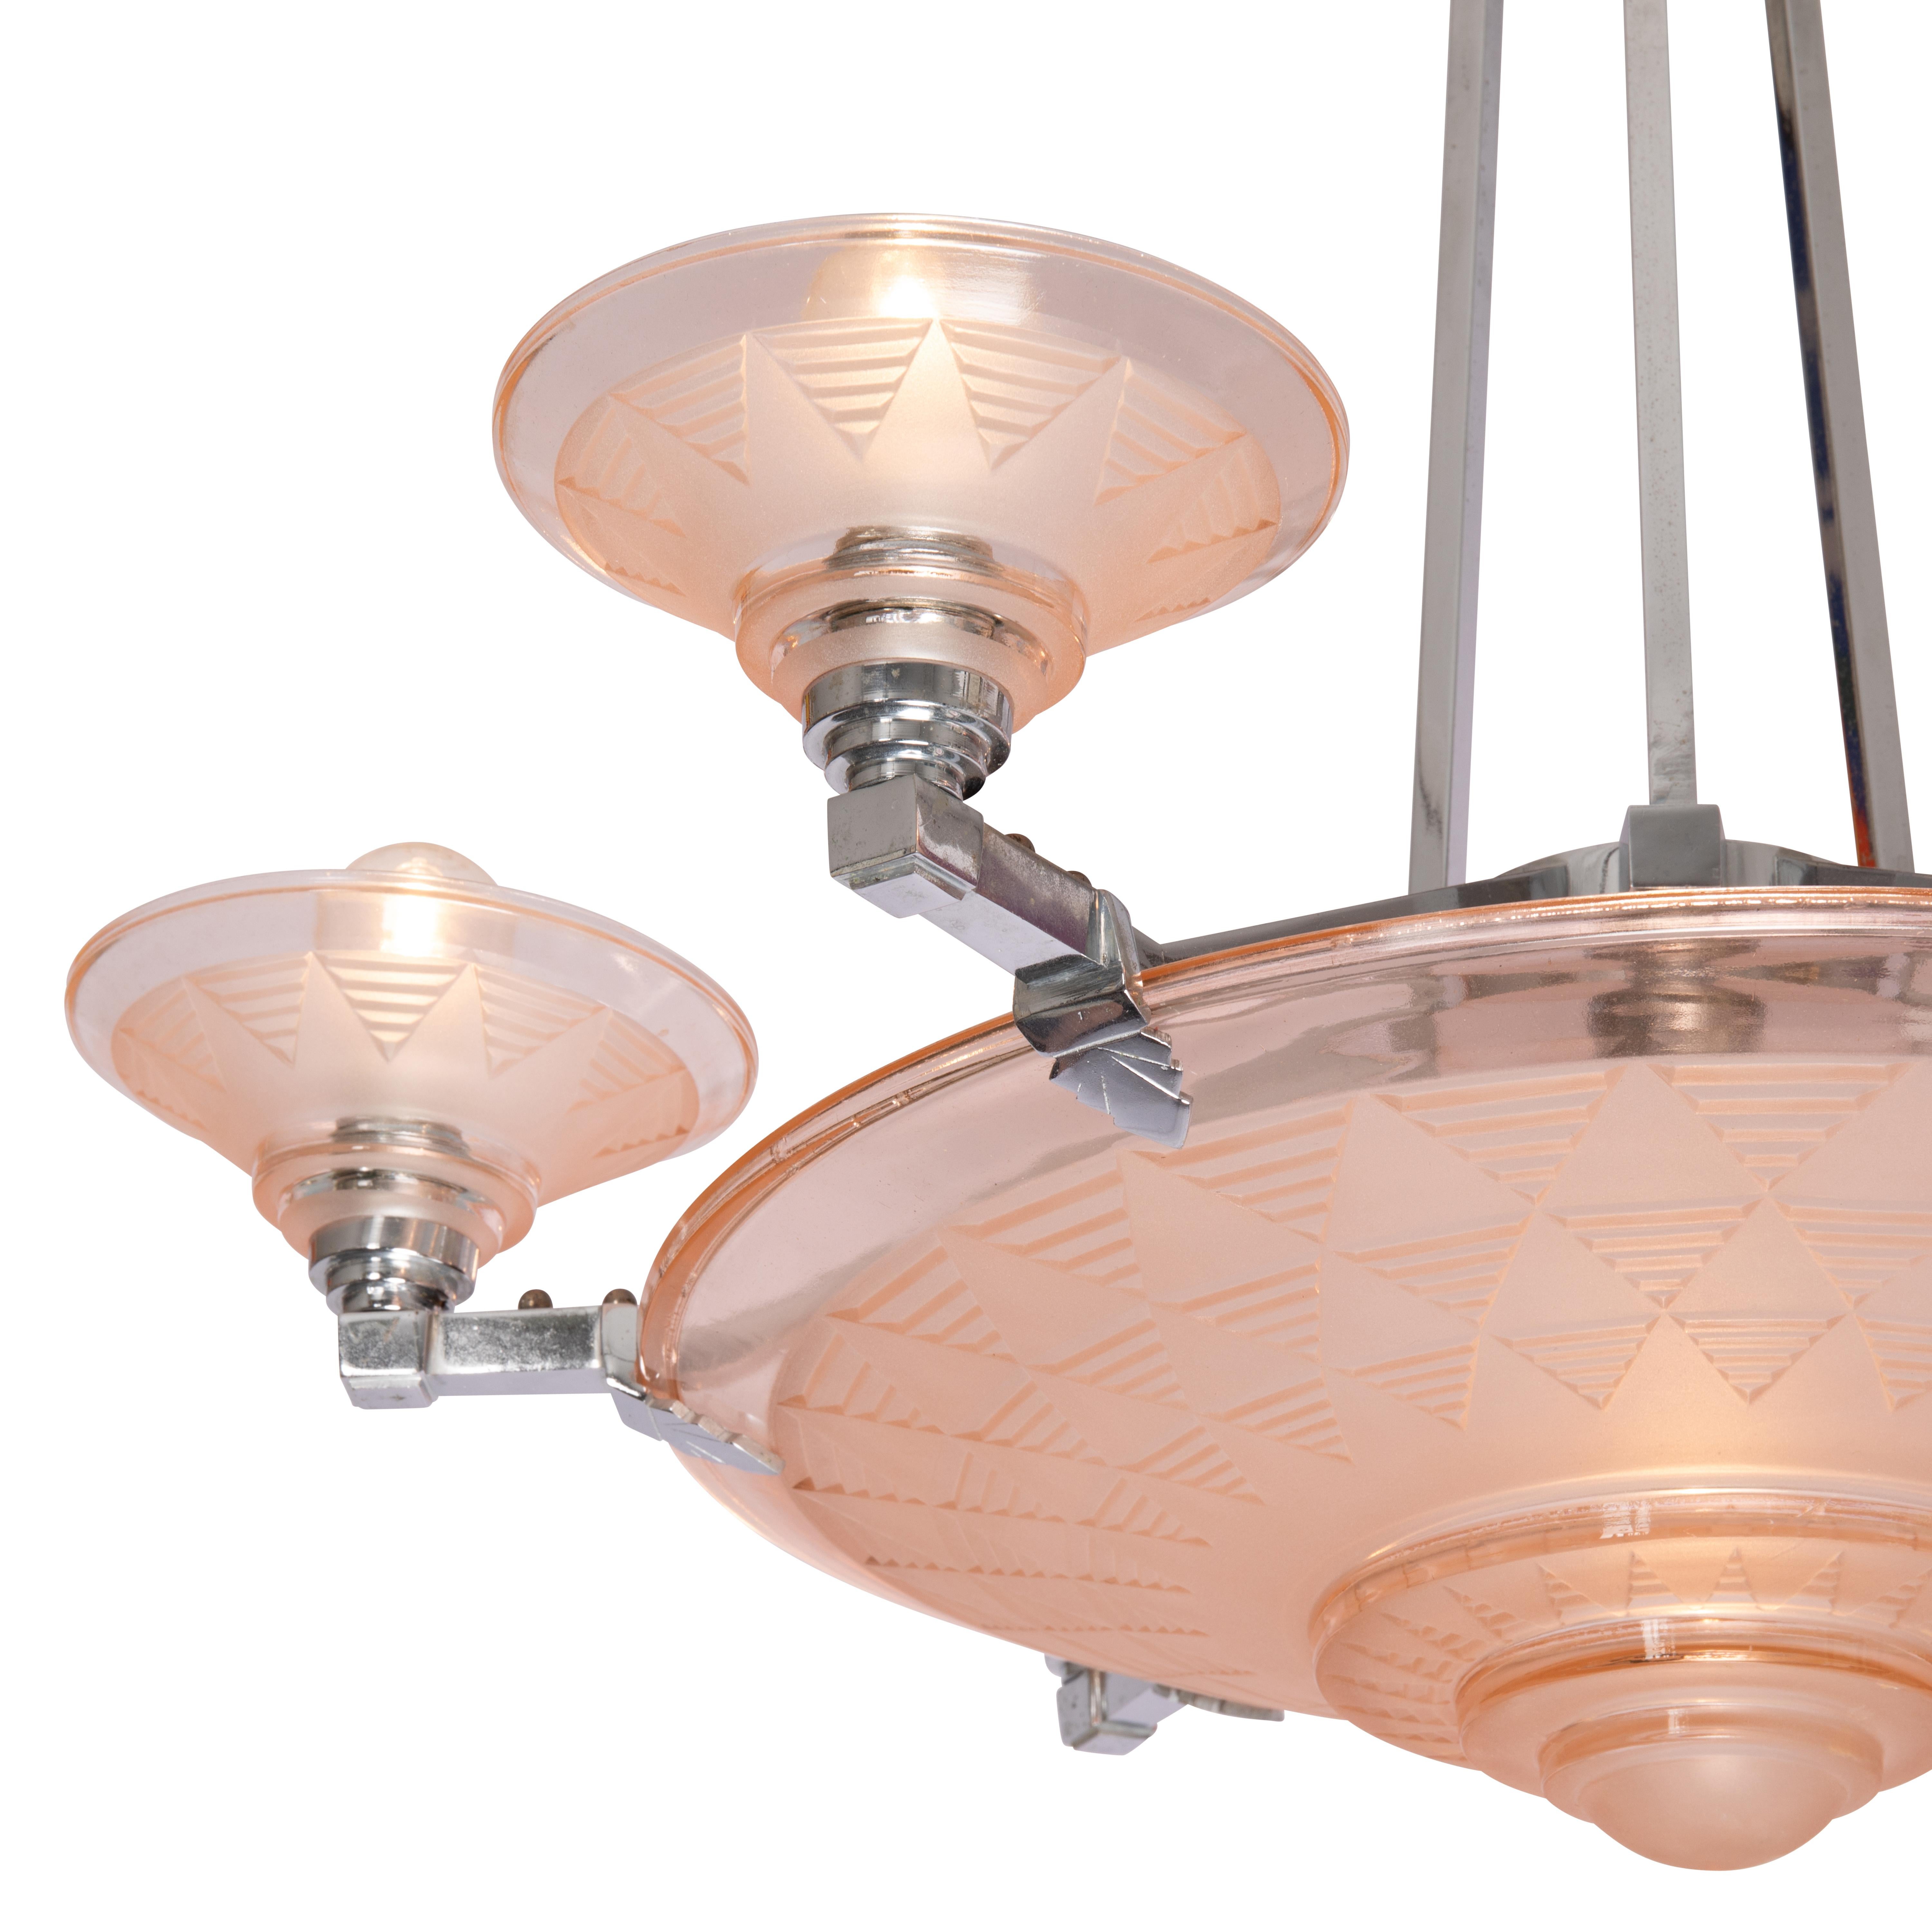 Circular Art Deco nickelled bronze and salmon pink frosted glass chandelier dating from the 1920’s or 1930’s by Henri Petitot.

A decorative, flush mount, conical canopy (ceiling mount at the top that serves to cover the electrical box in the